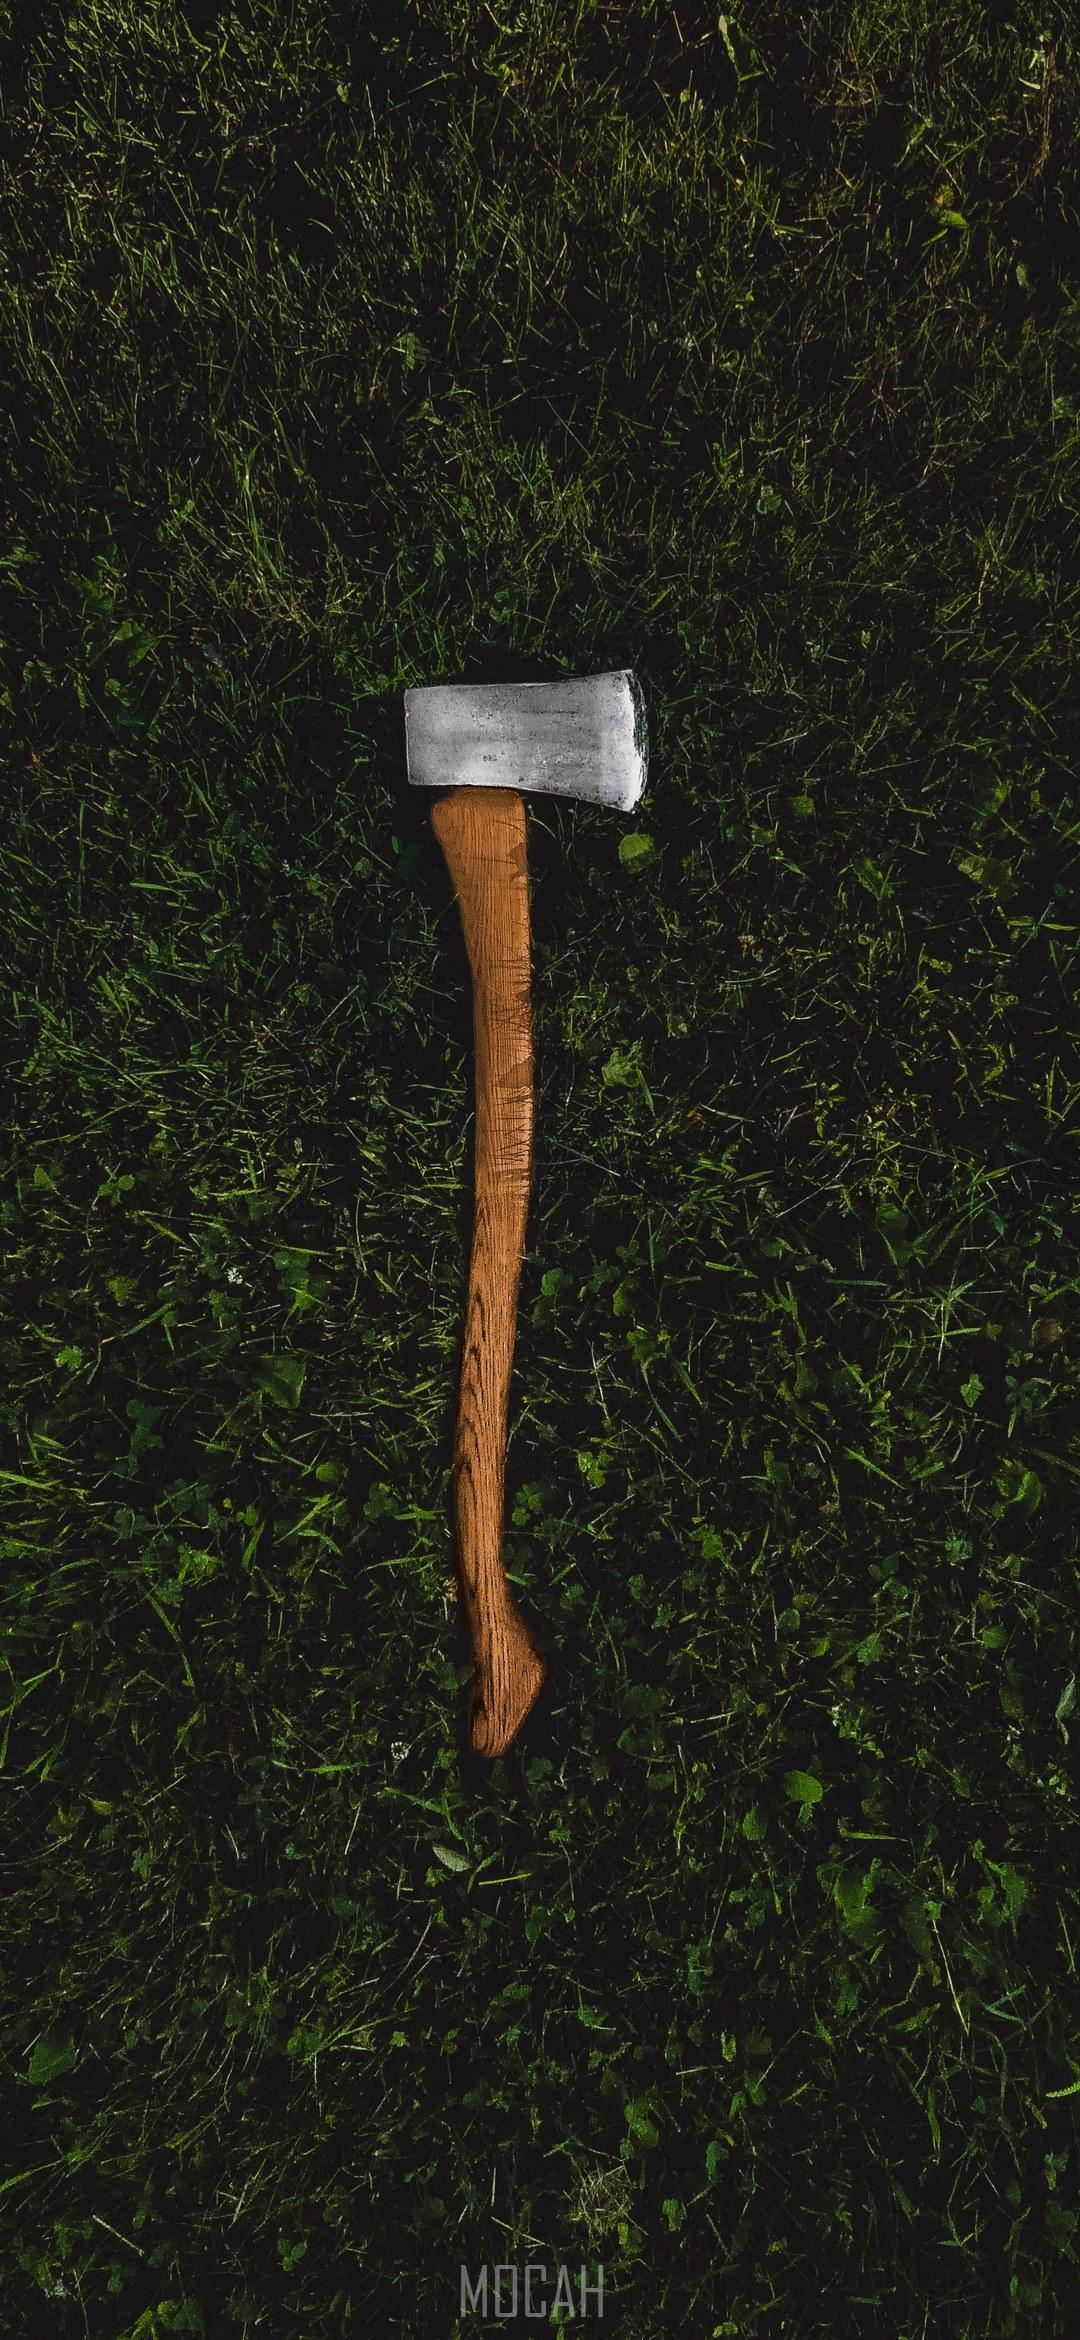 HD wallpaper, 1080X2340, A Metal Ax With A Wooden Handle Laid Down In The Middle Of A Grassy Ground, A Cut Above, Huawei Nova 5I Pro Wallpaper Hd